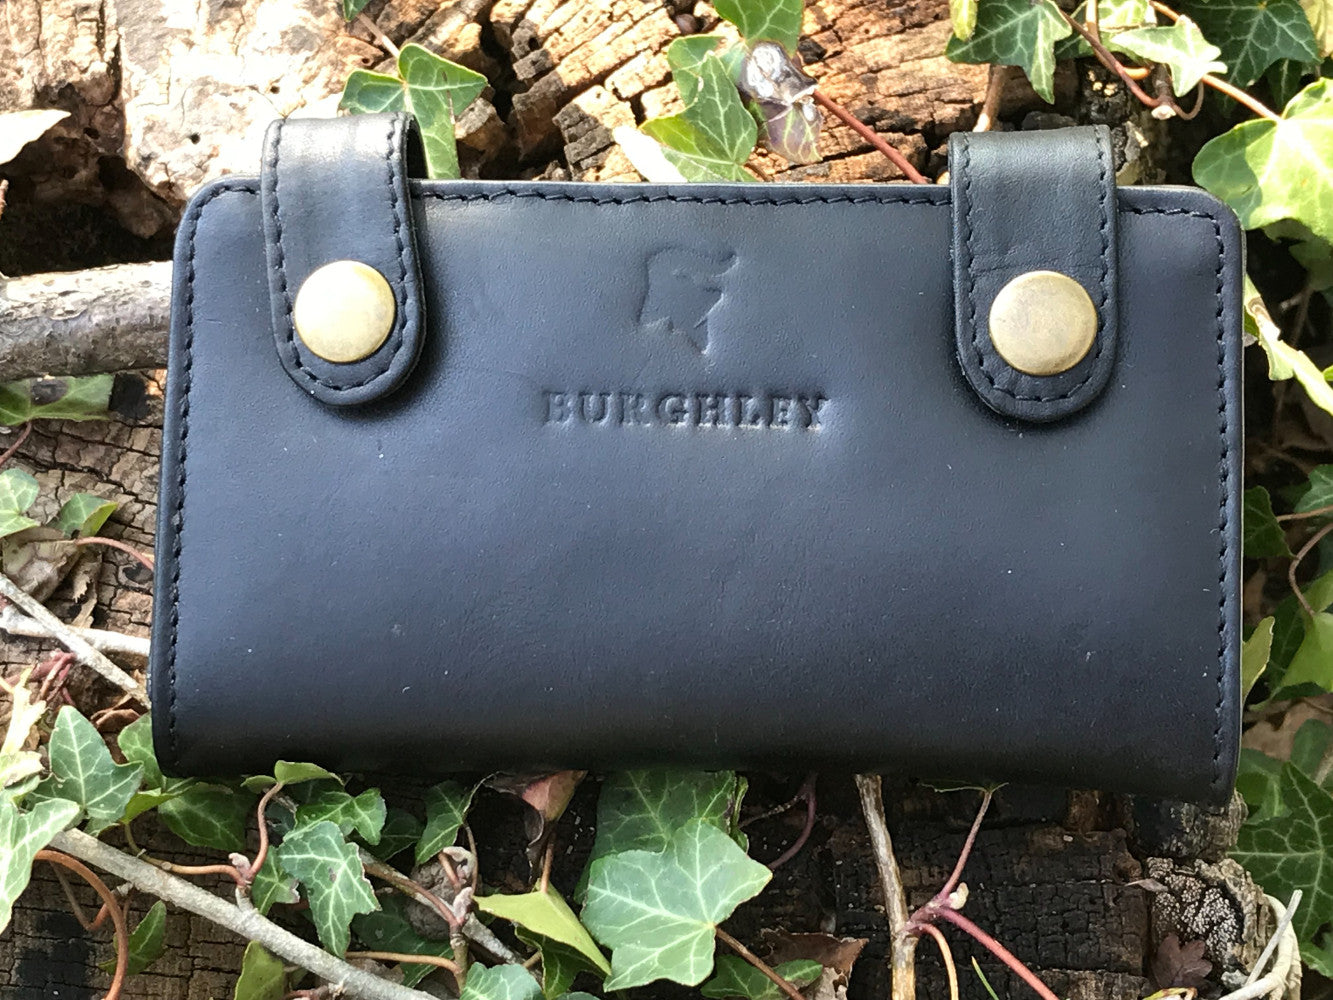 The Wix. A rugged, military styled wallet by Burghley Bags